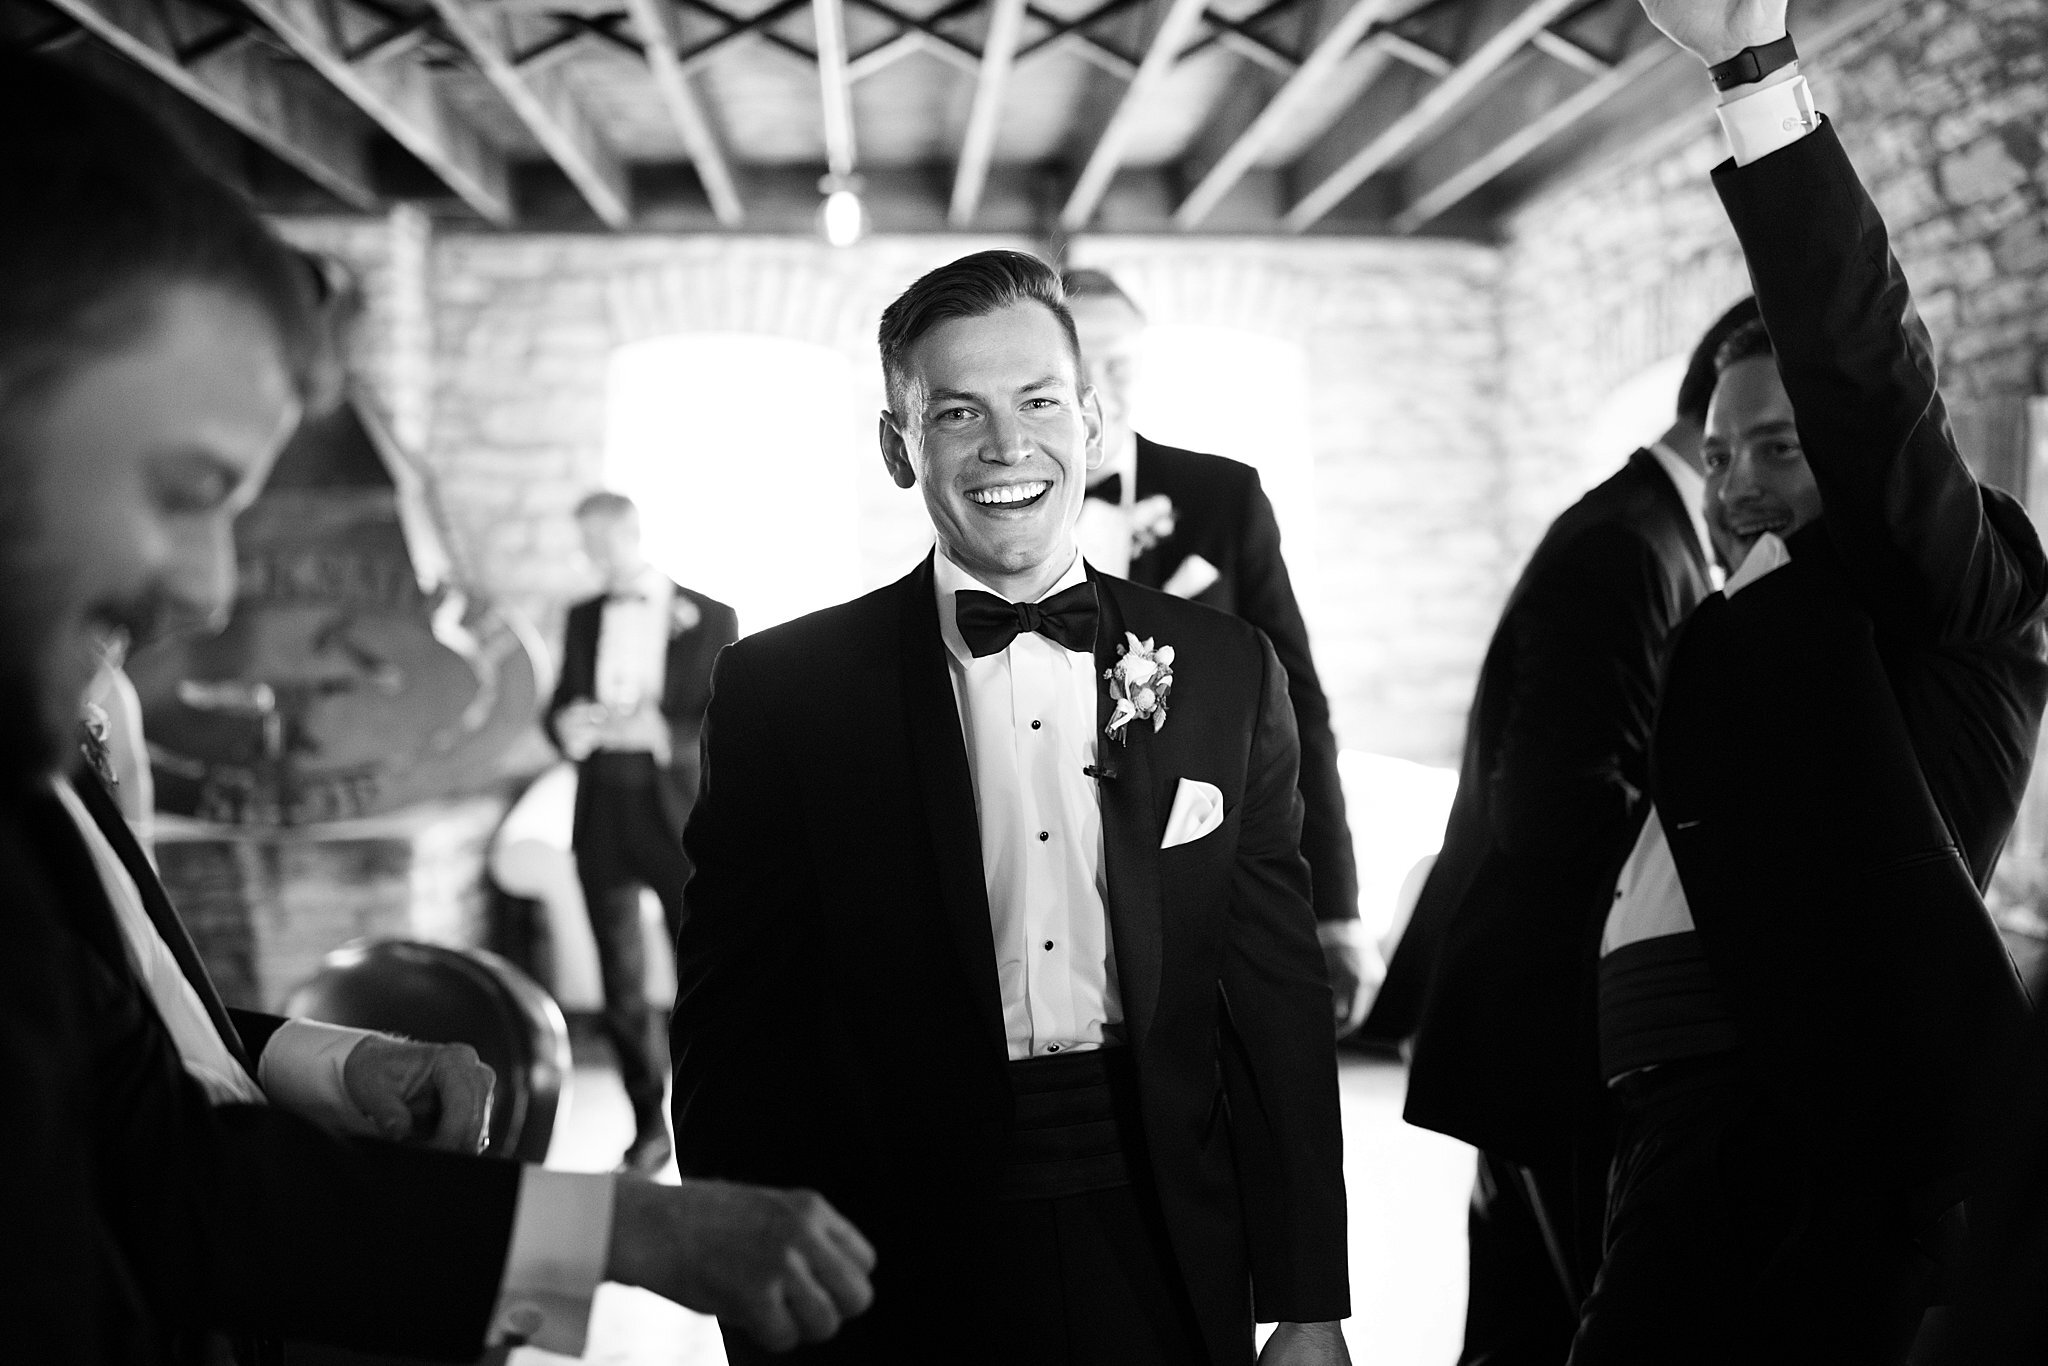  Groom smiling surrounded by groomsmen. 